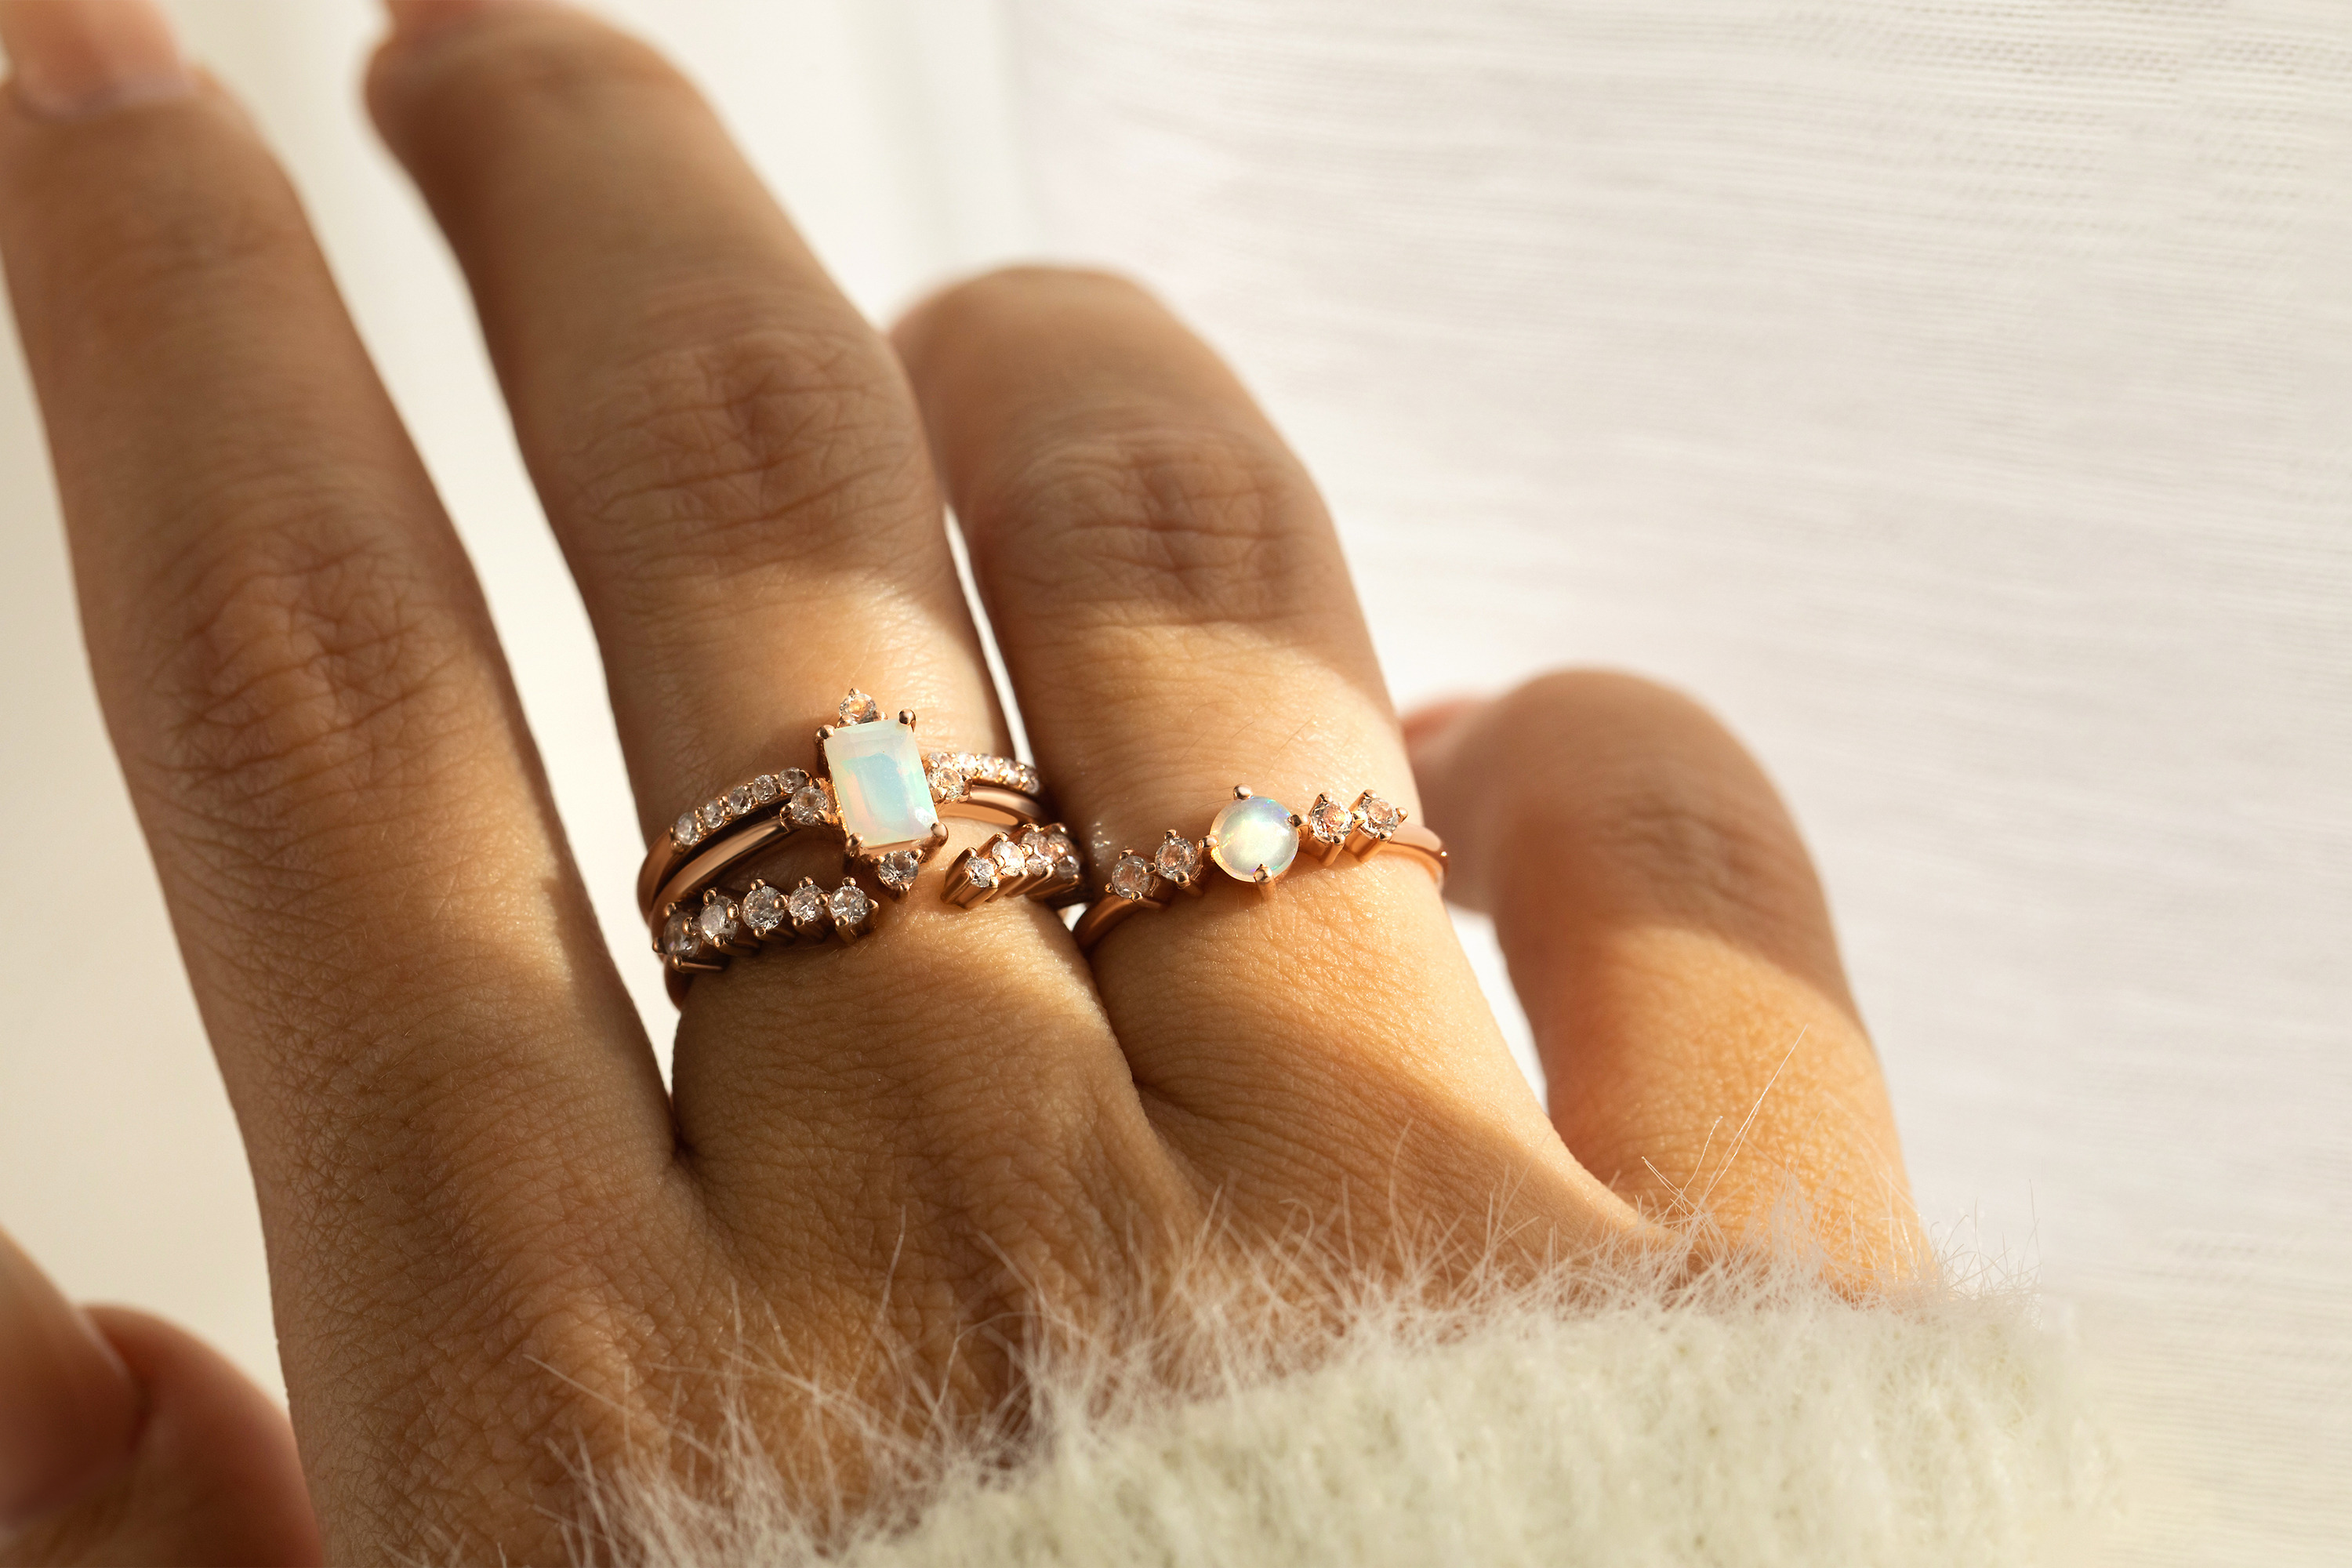 Two Opal rings and two band rings in different styles are presented on a hand.